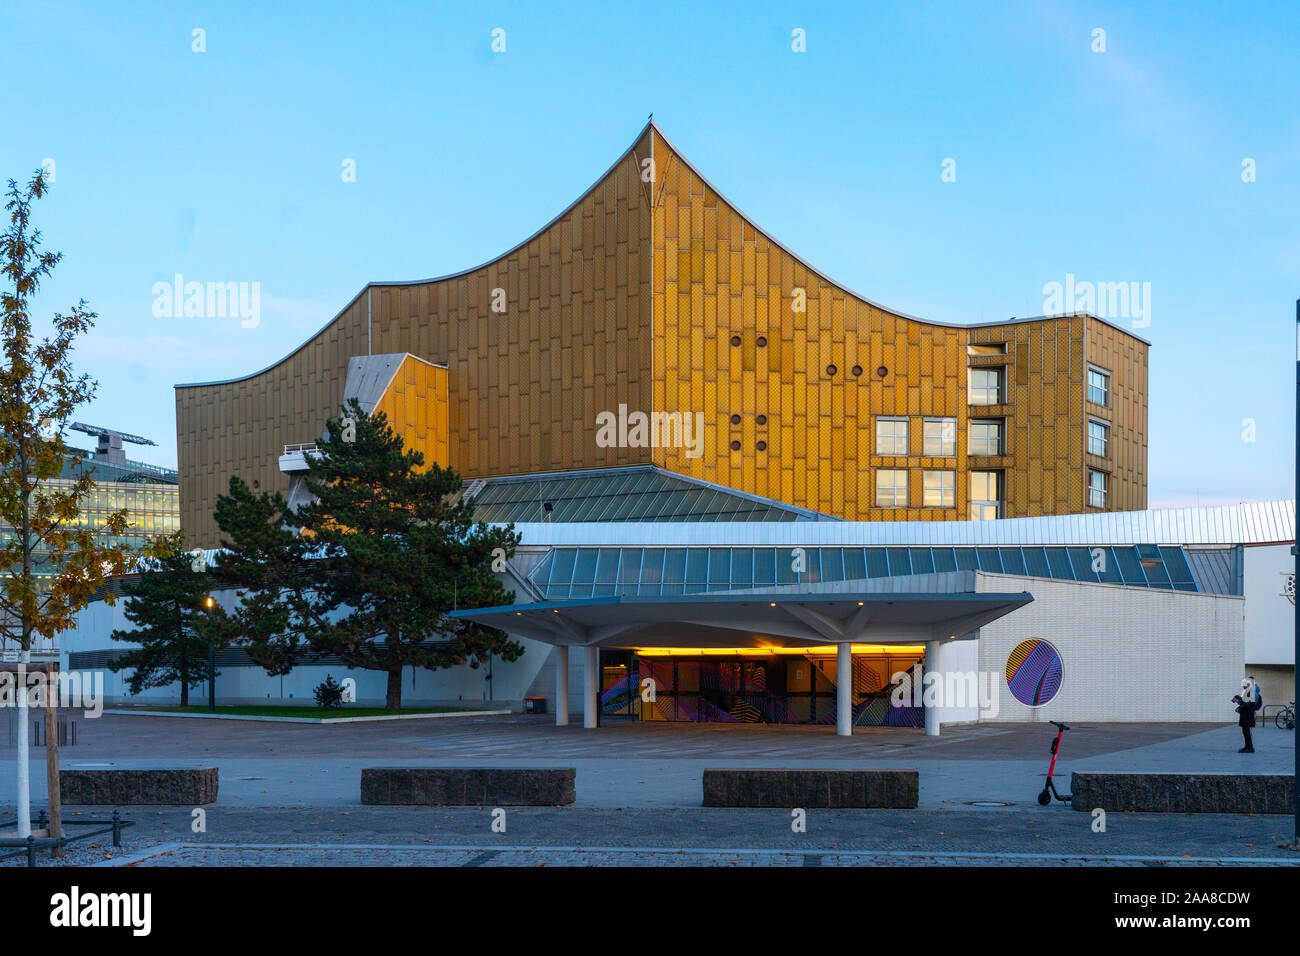 The Berliner Philharmonie Hall in Berlin. From a series of travel photos in Germany. Photo date: Thursday, November 14, 2019. Photo: Roger Garfield/Al Stock Photo